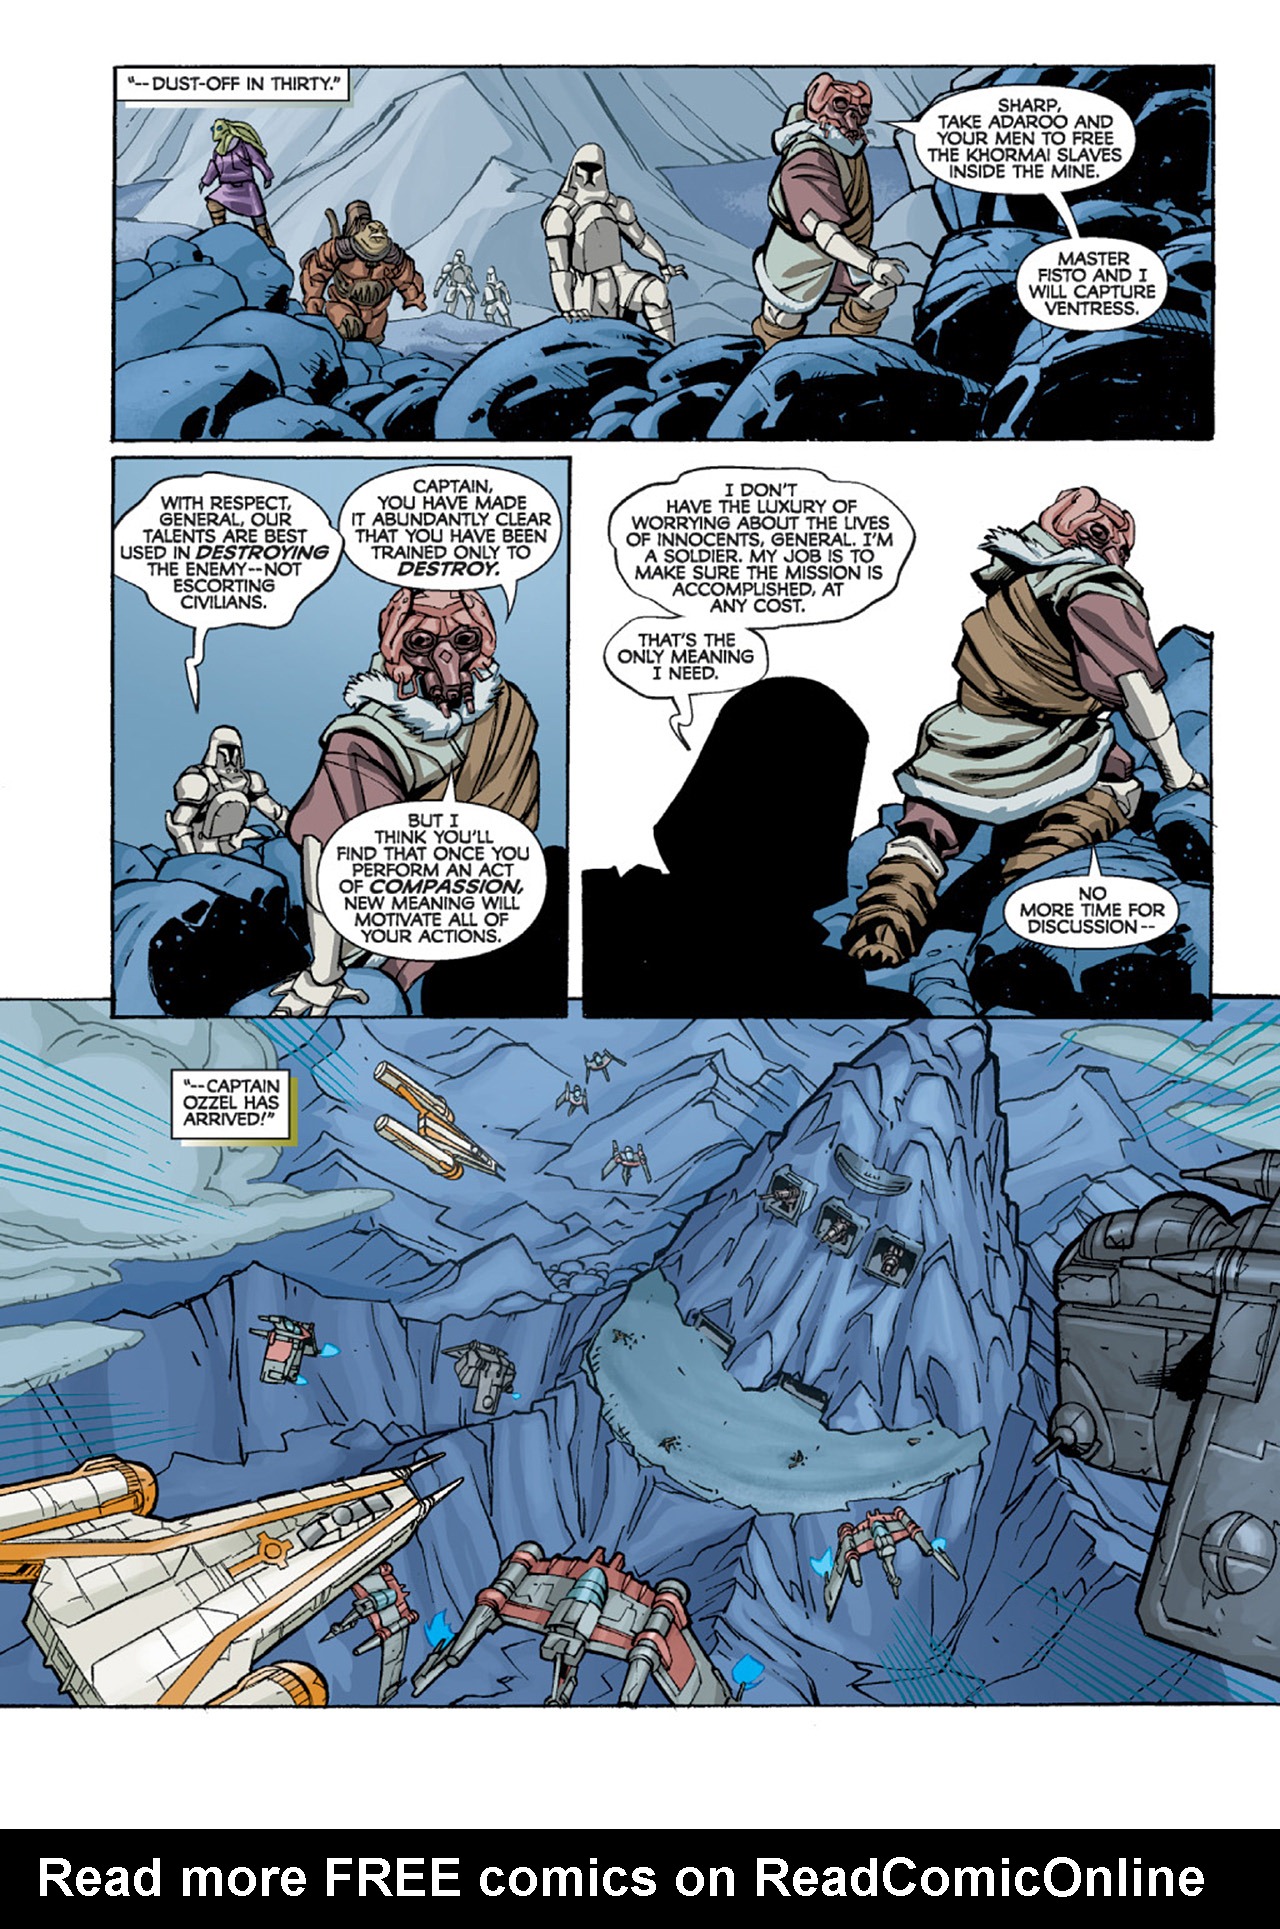 Read online Star Wars: The Clone Wars comic -  Issue #9 - 7